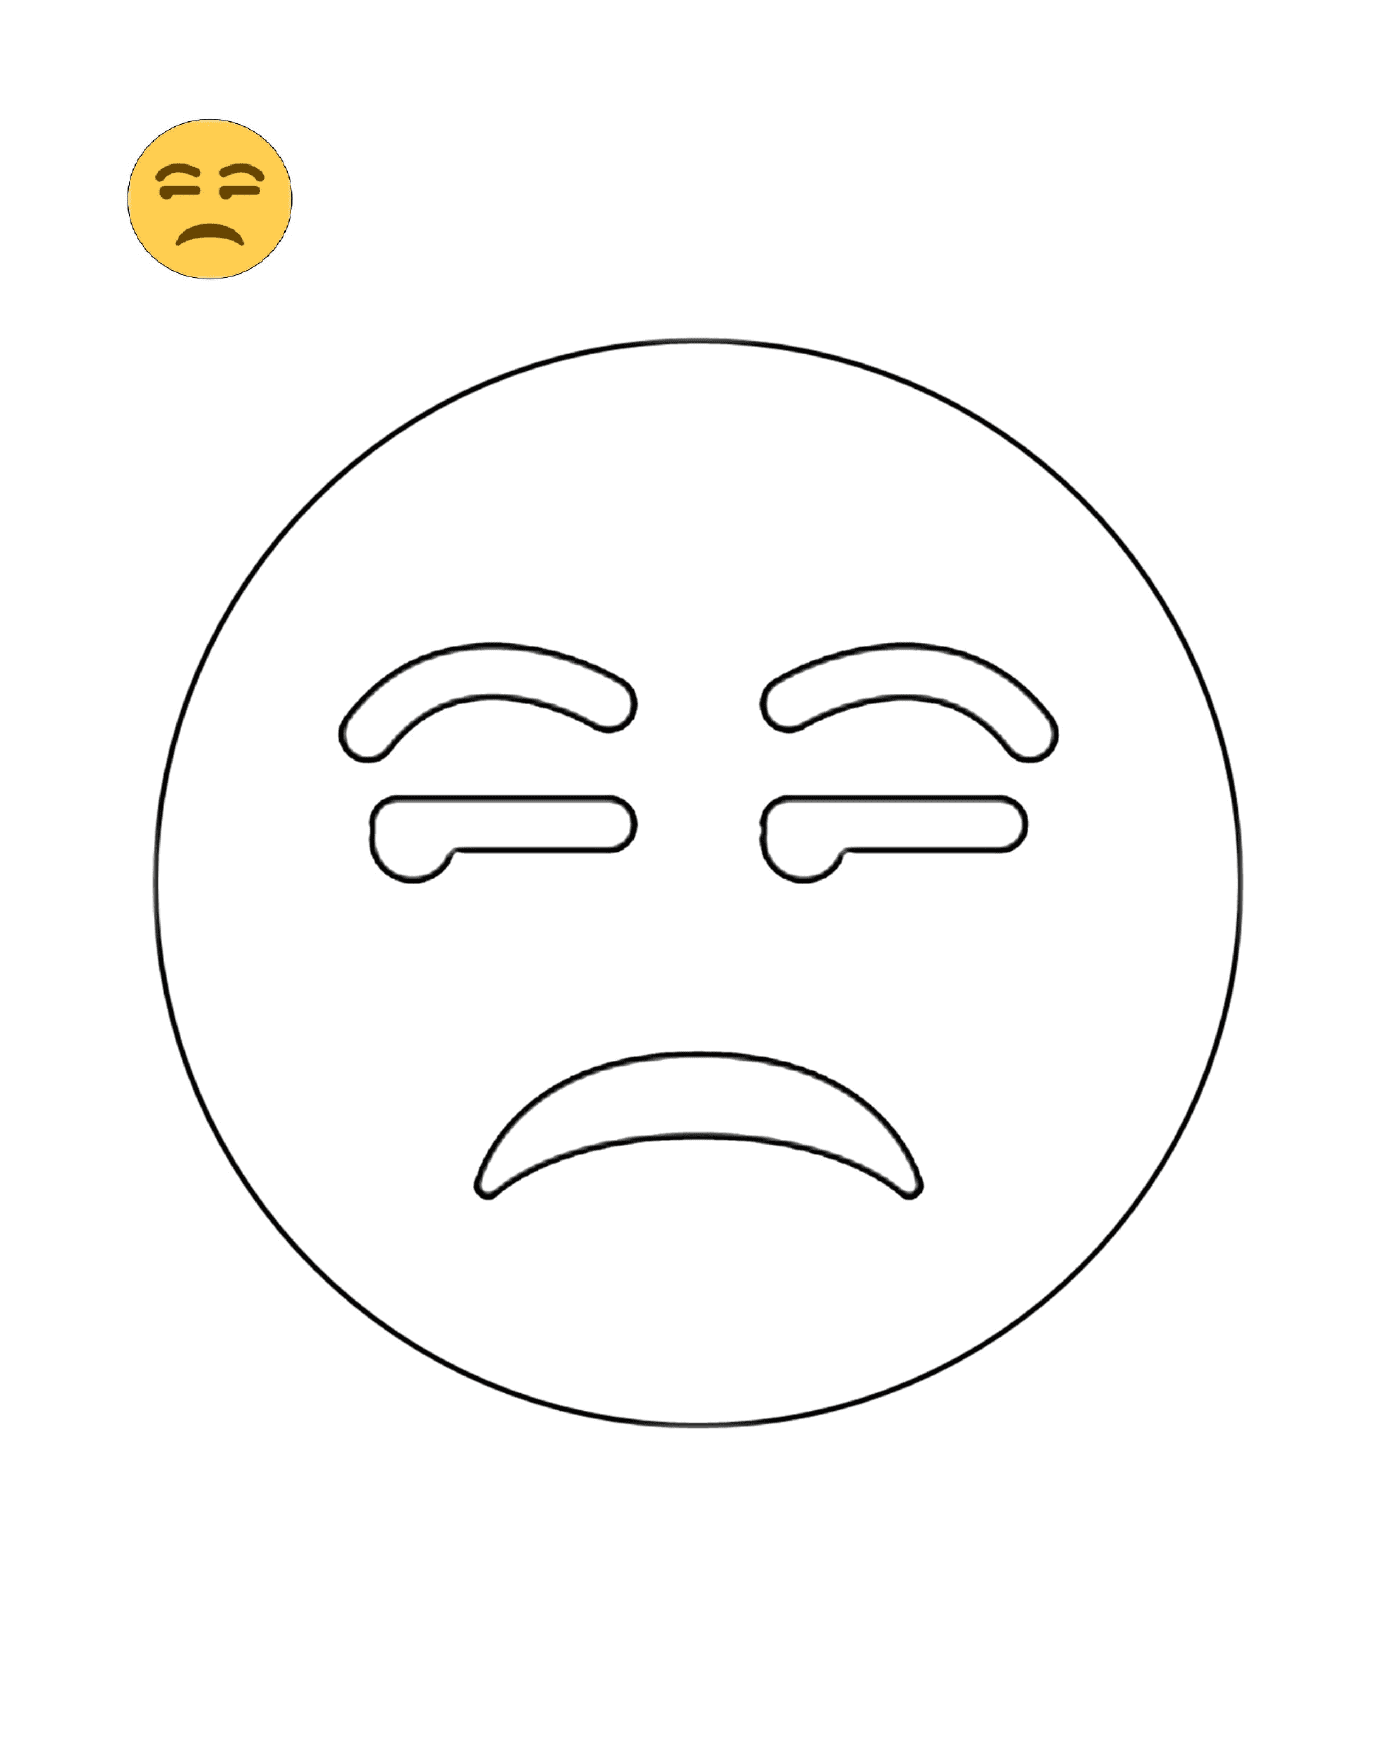  A sad face according to Twitter 